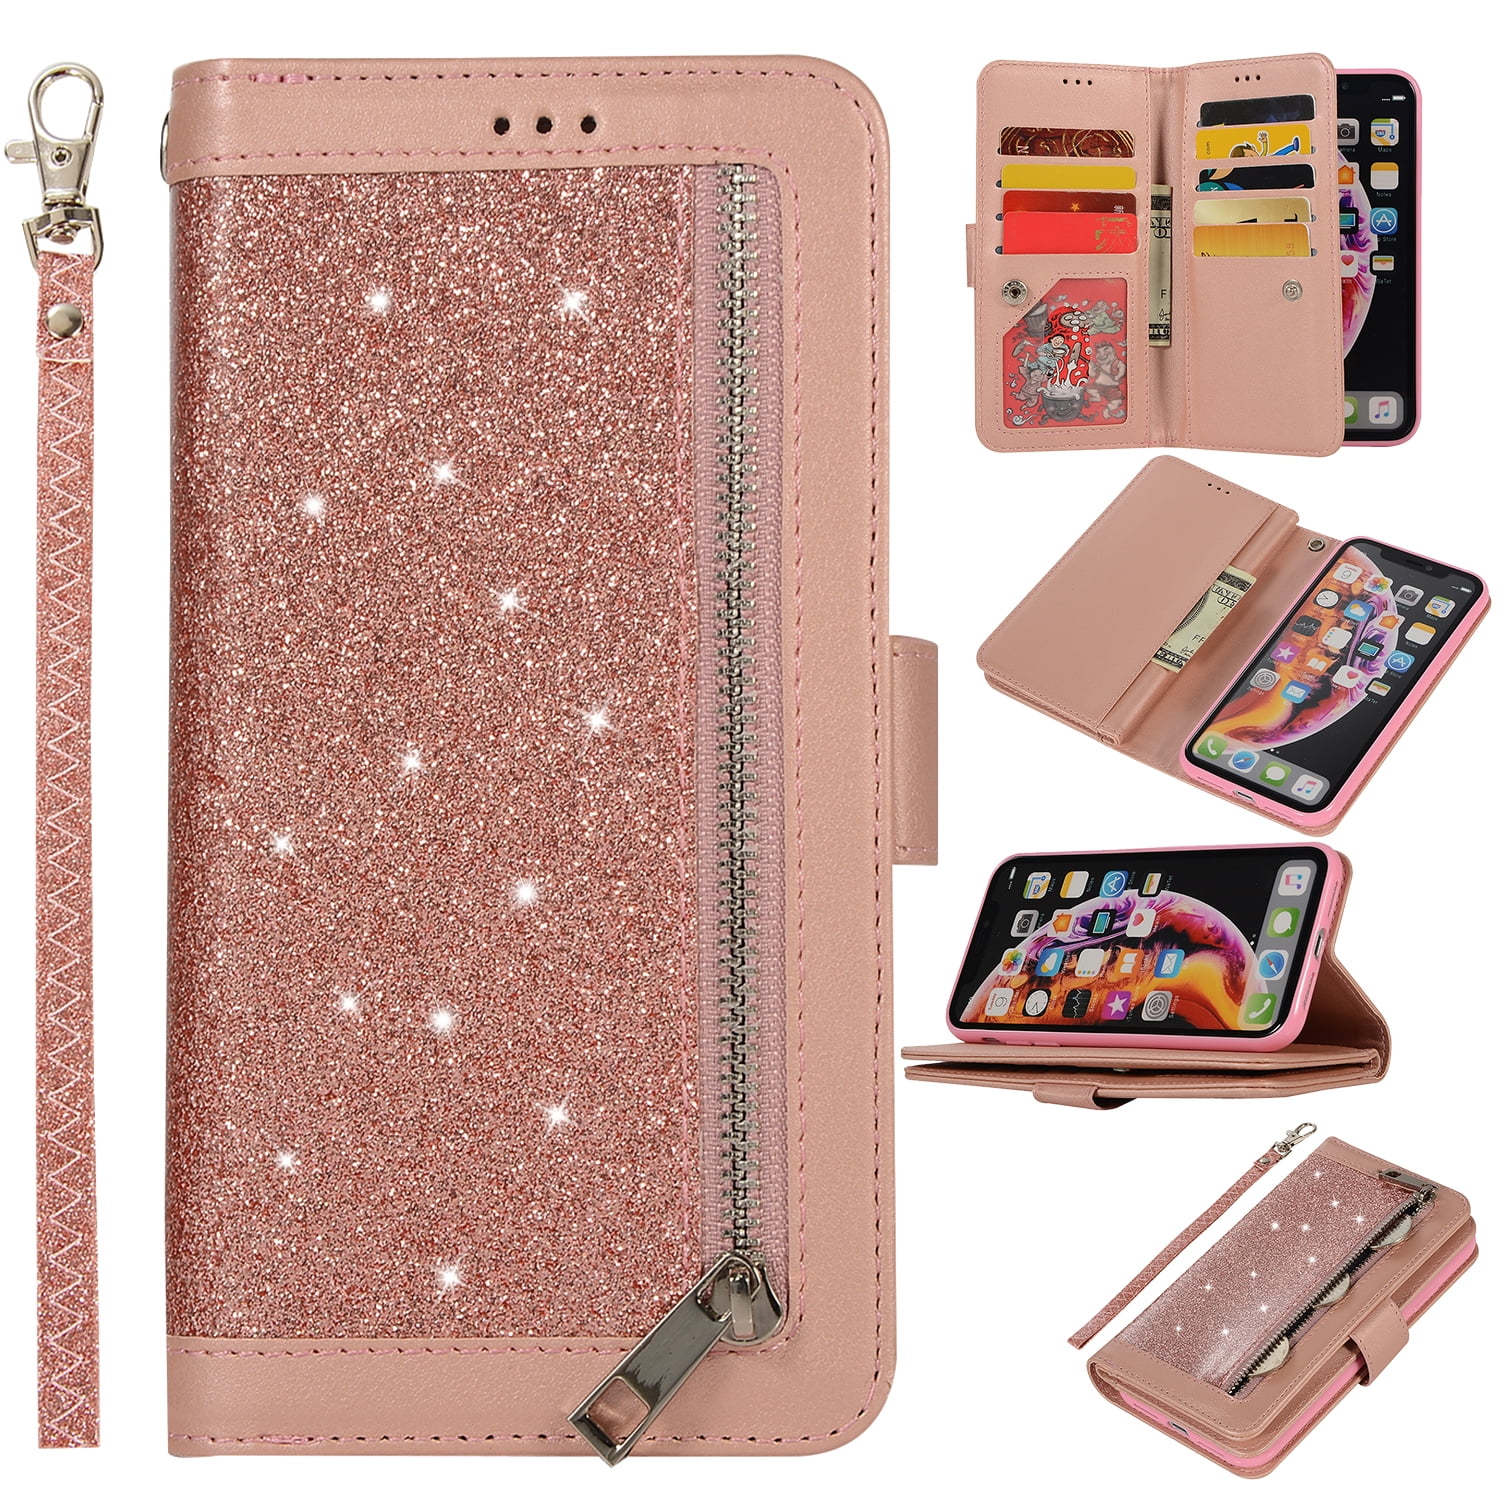 Wallet Stand as Gift with Magnetic Closure Cards Slot Holder Cash Pockets PU Leather Wallet Shockproof Case Cover for Apple iPhone Xr Pink Sun ISADENSER iPhone Xr Case iPhone Xr Flip Case